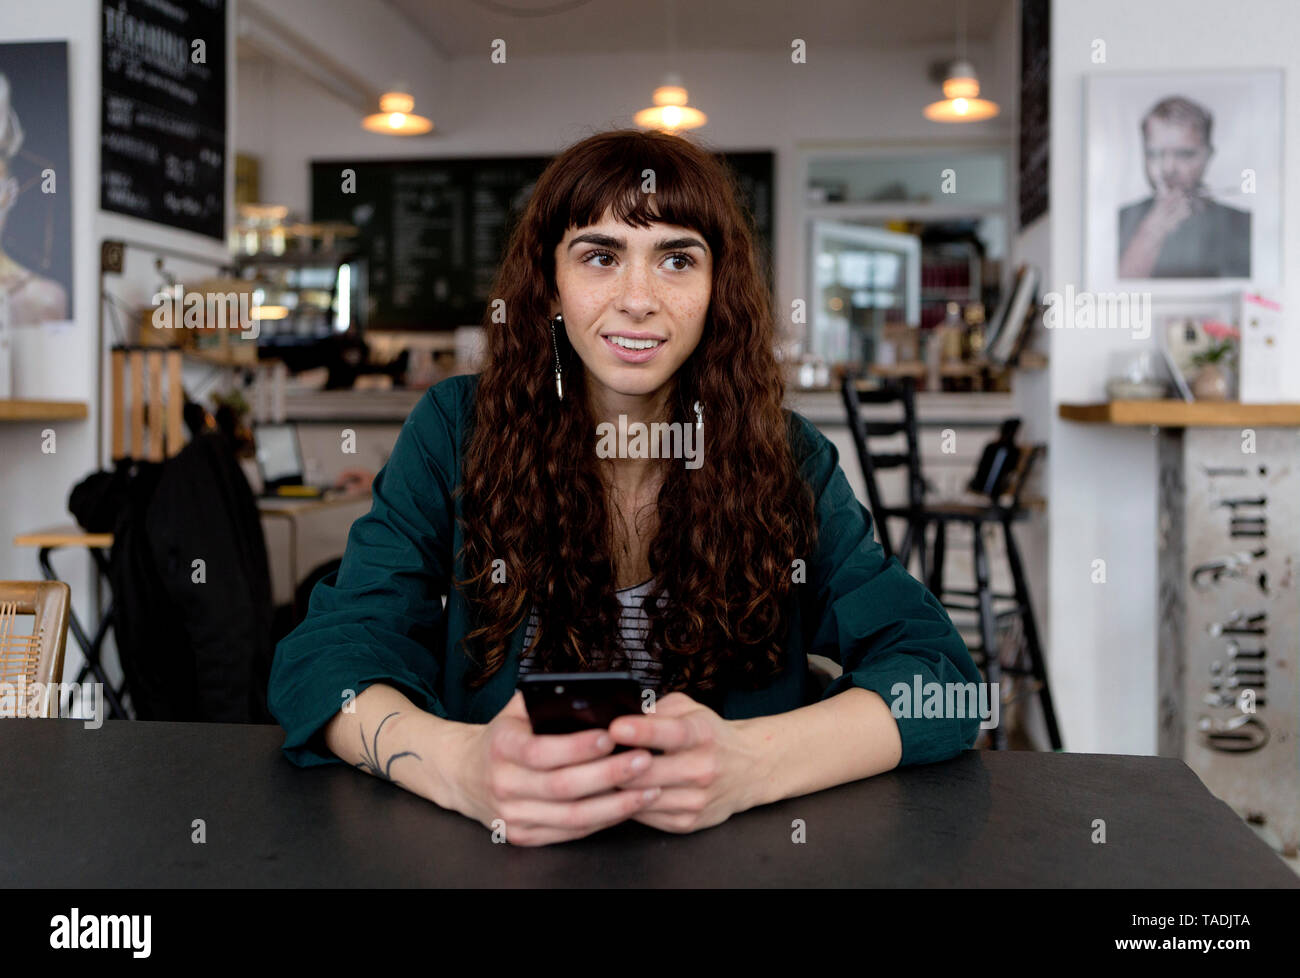 Smiling young woman with cell phone in a cafe looking around Stock Photo